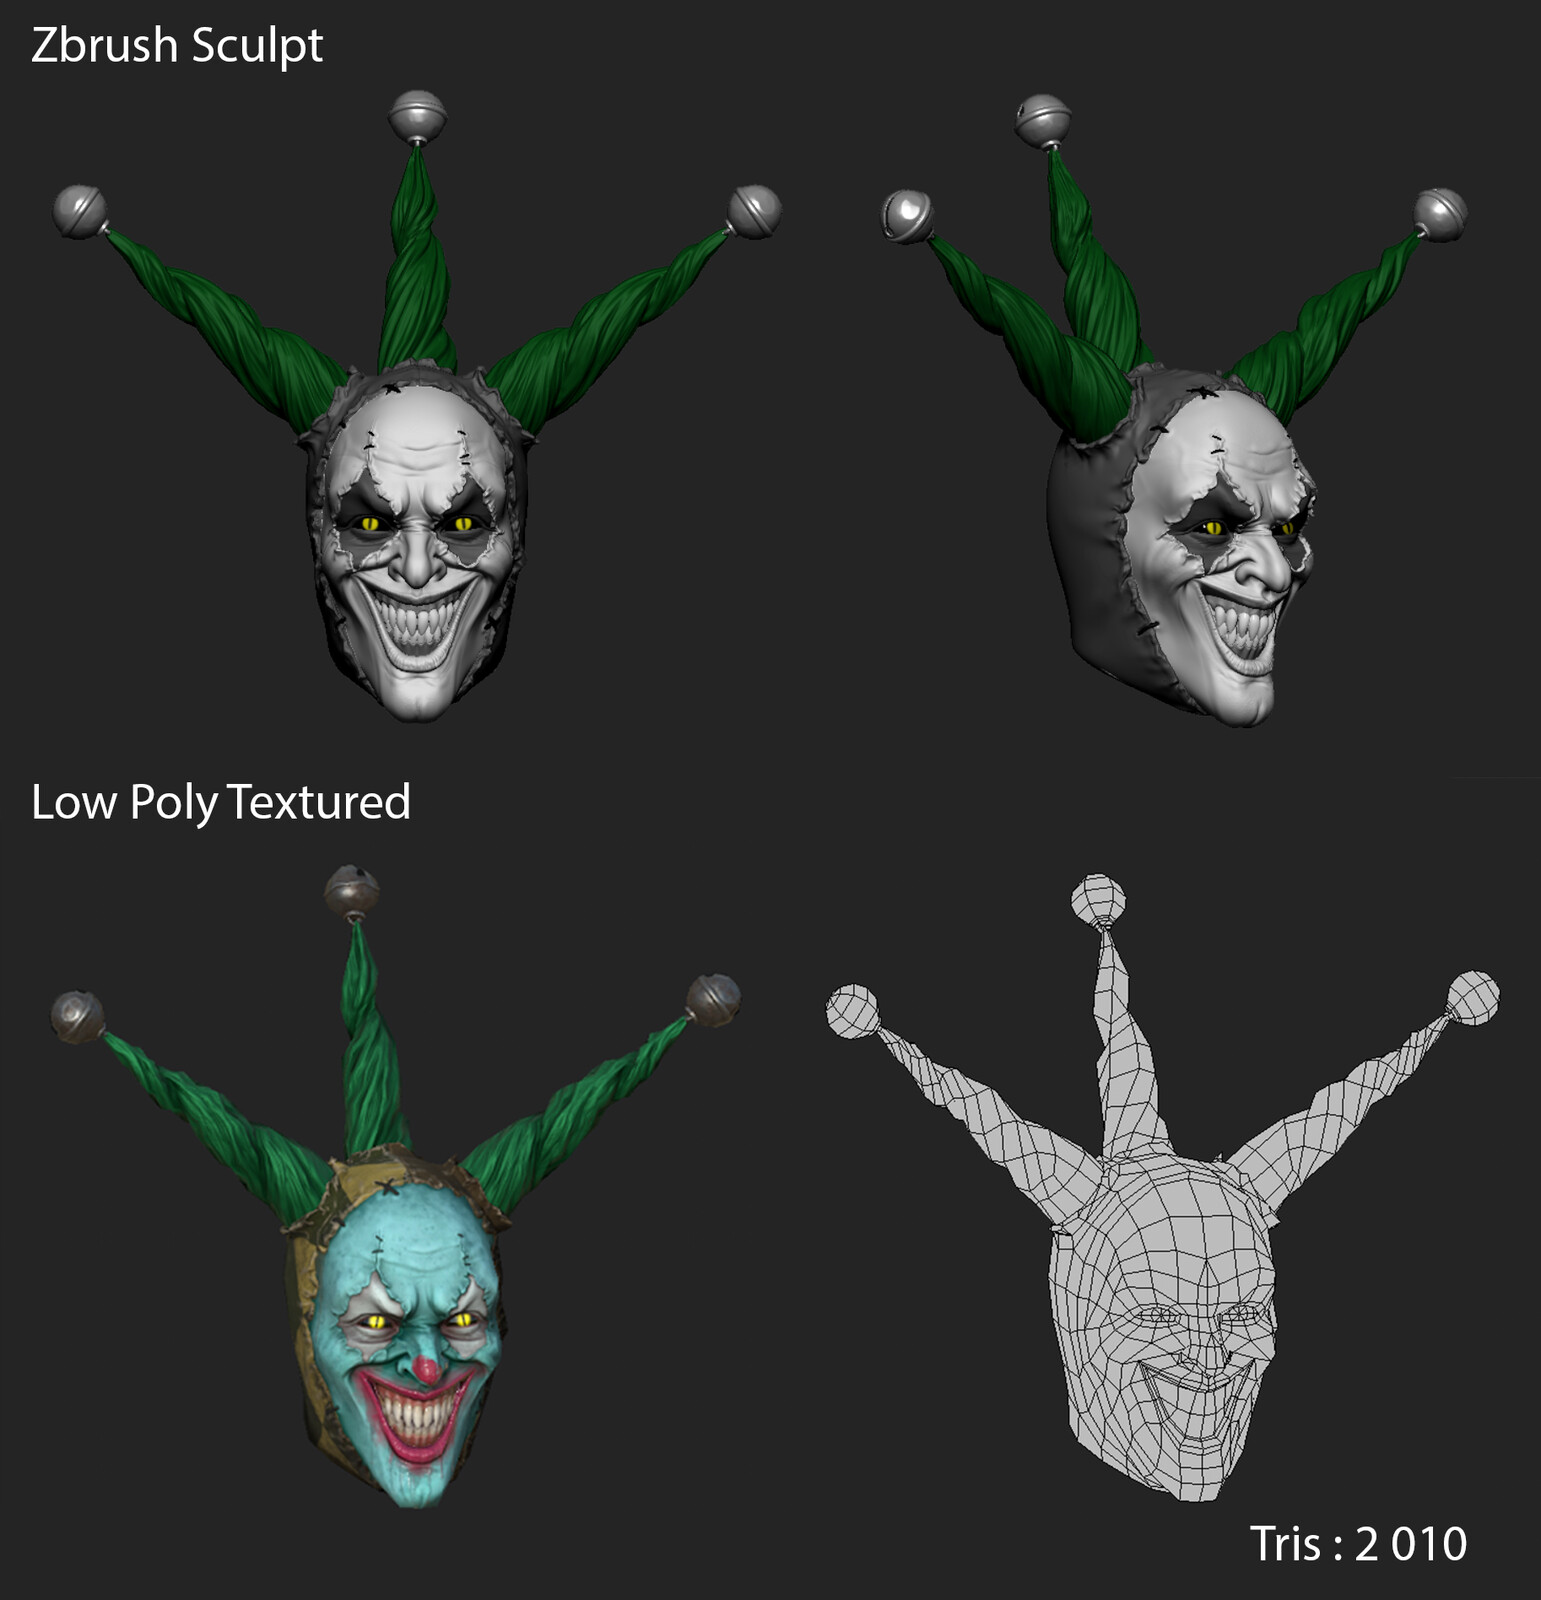 Harlequin Apparition Decoration
Responsible concepting, for the hi poly sculpt, low poly game model, UV-ing, baking, texturing and look-dev in game engine.